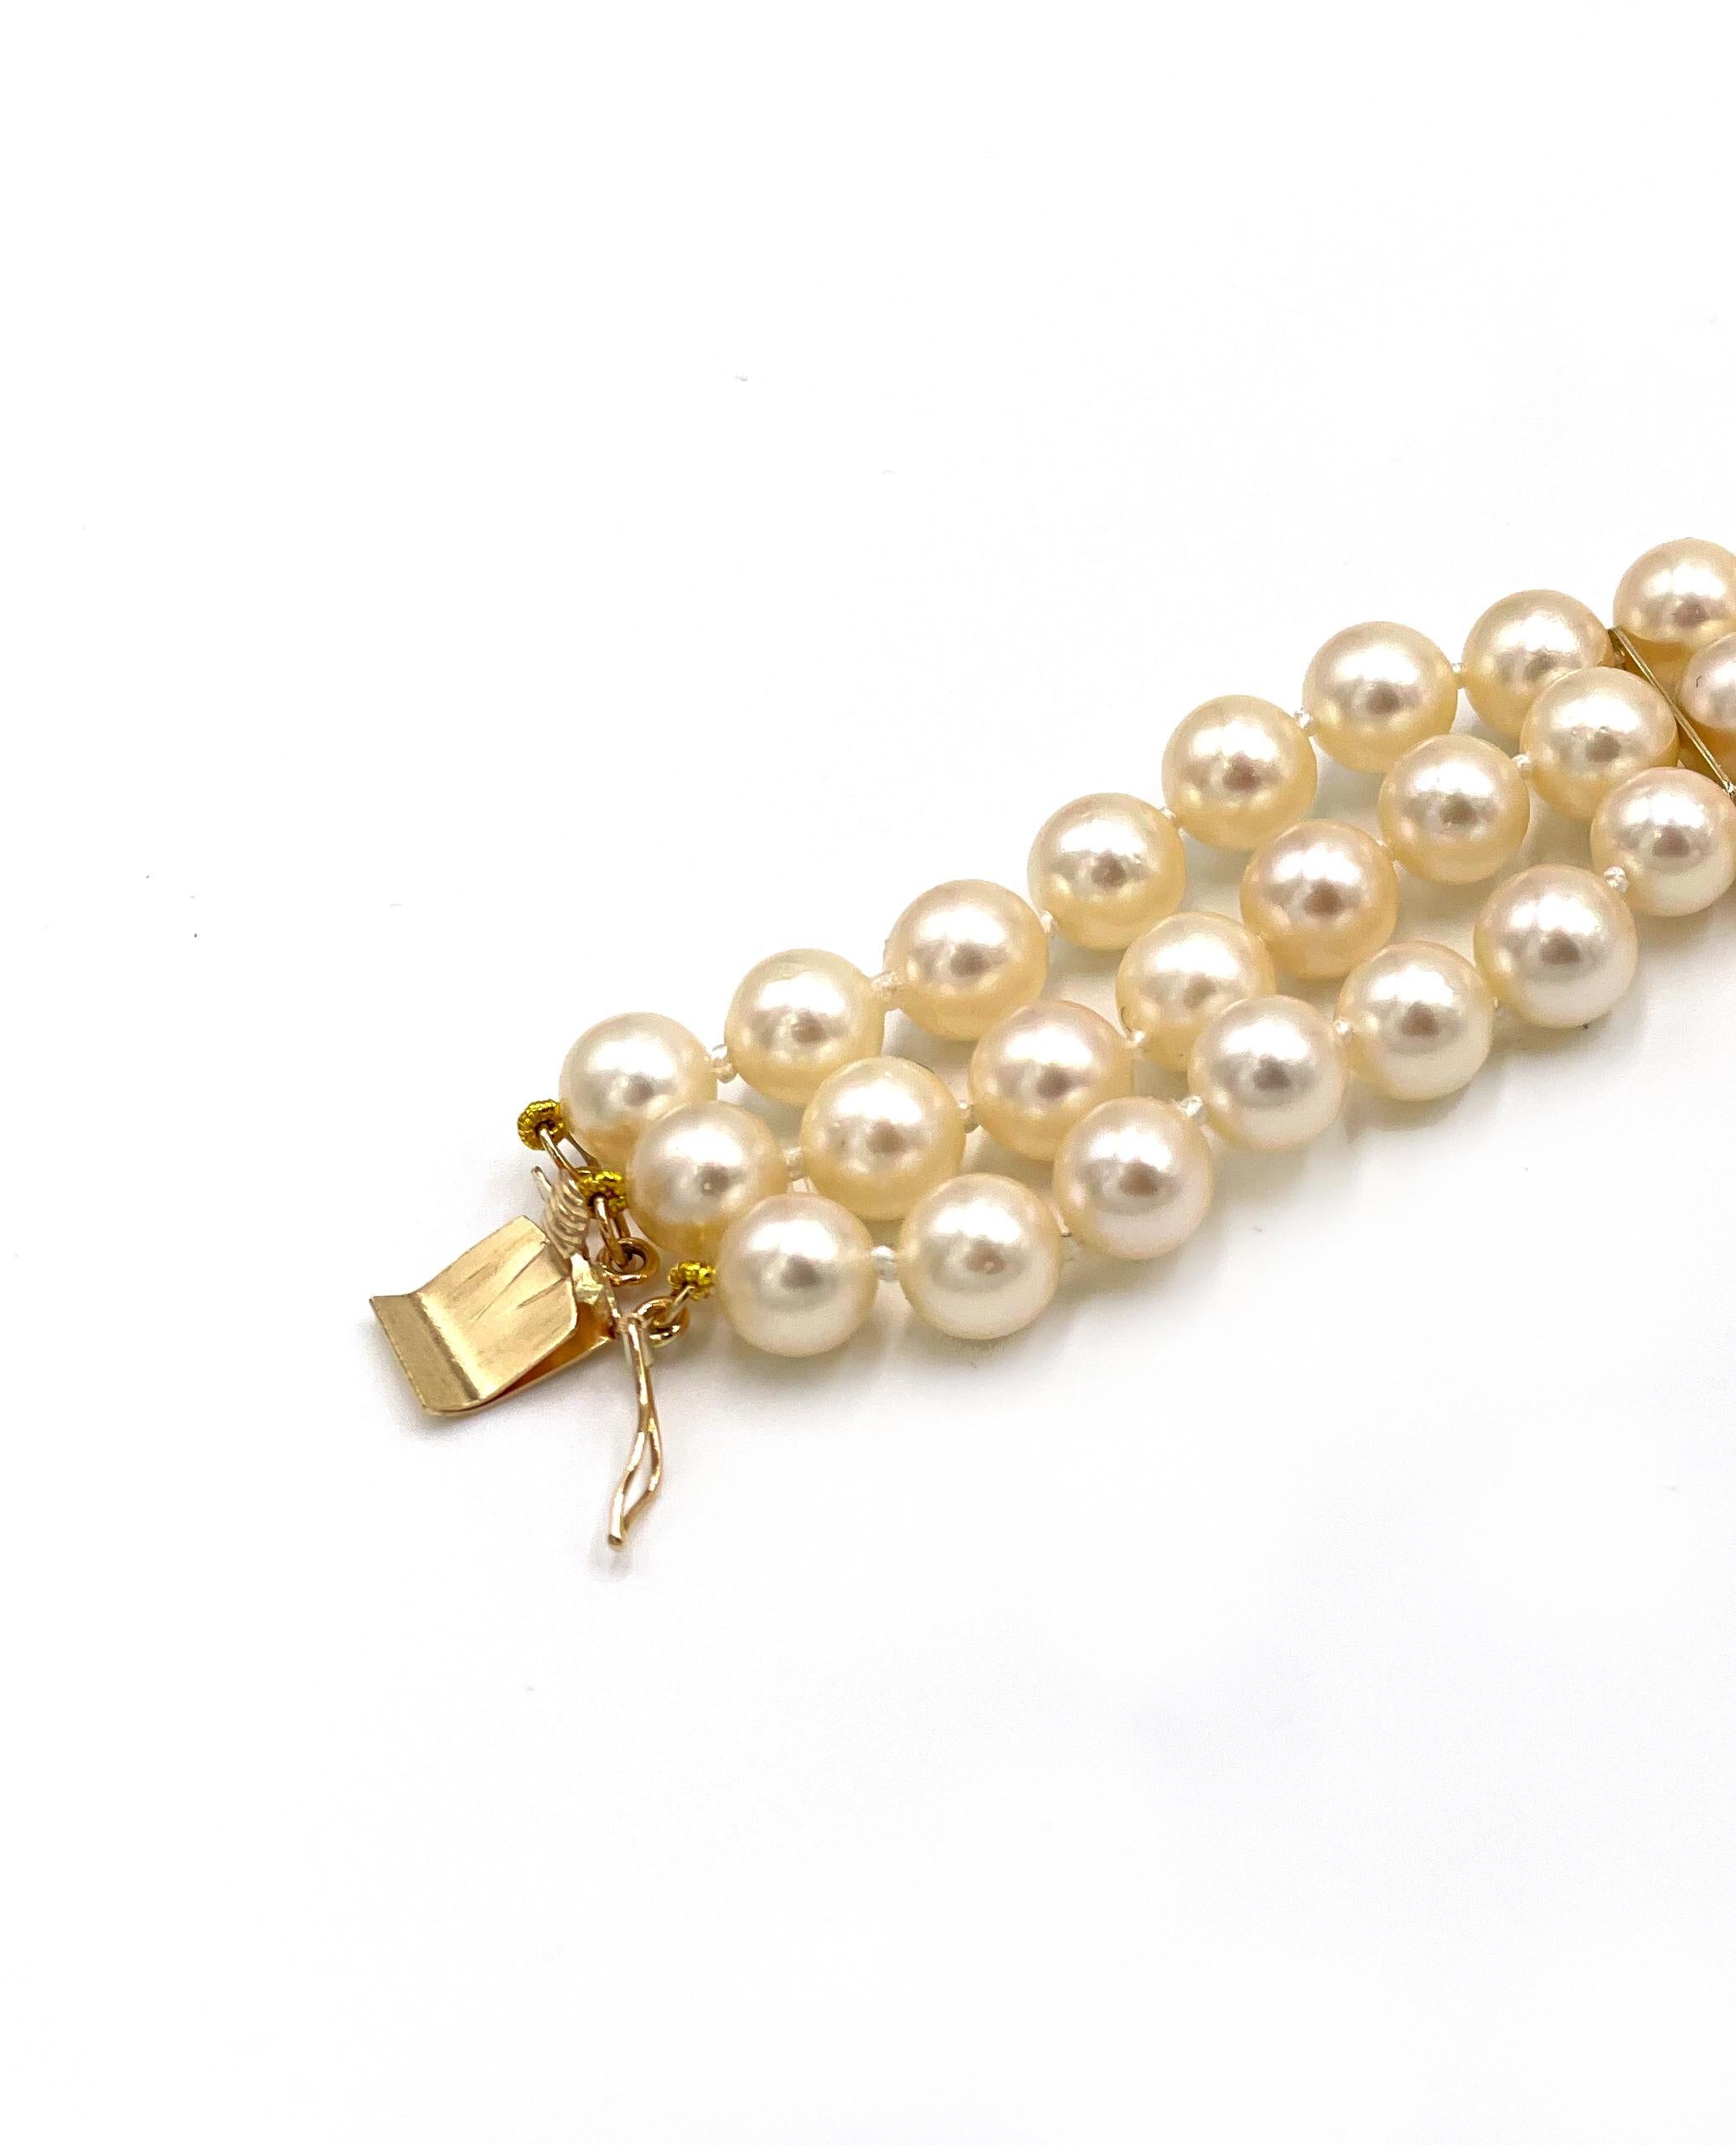 Three row multi strand pearl bracelet with 14K yellow gold spacers and fancy 14K and 18K lock adorned with 0.11 carats natural yellow diamonds and 0.32 carats near colorless diamonds.  The pearls are on average 6-6.5mm. The bracelet also has a